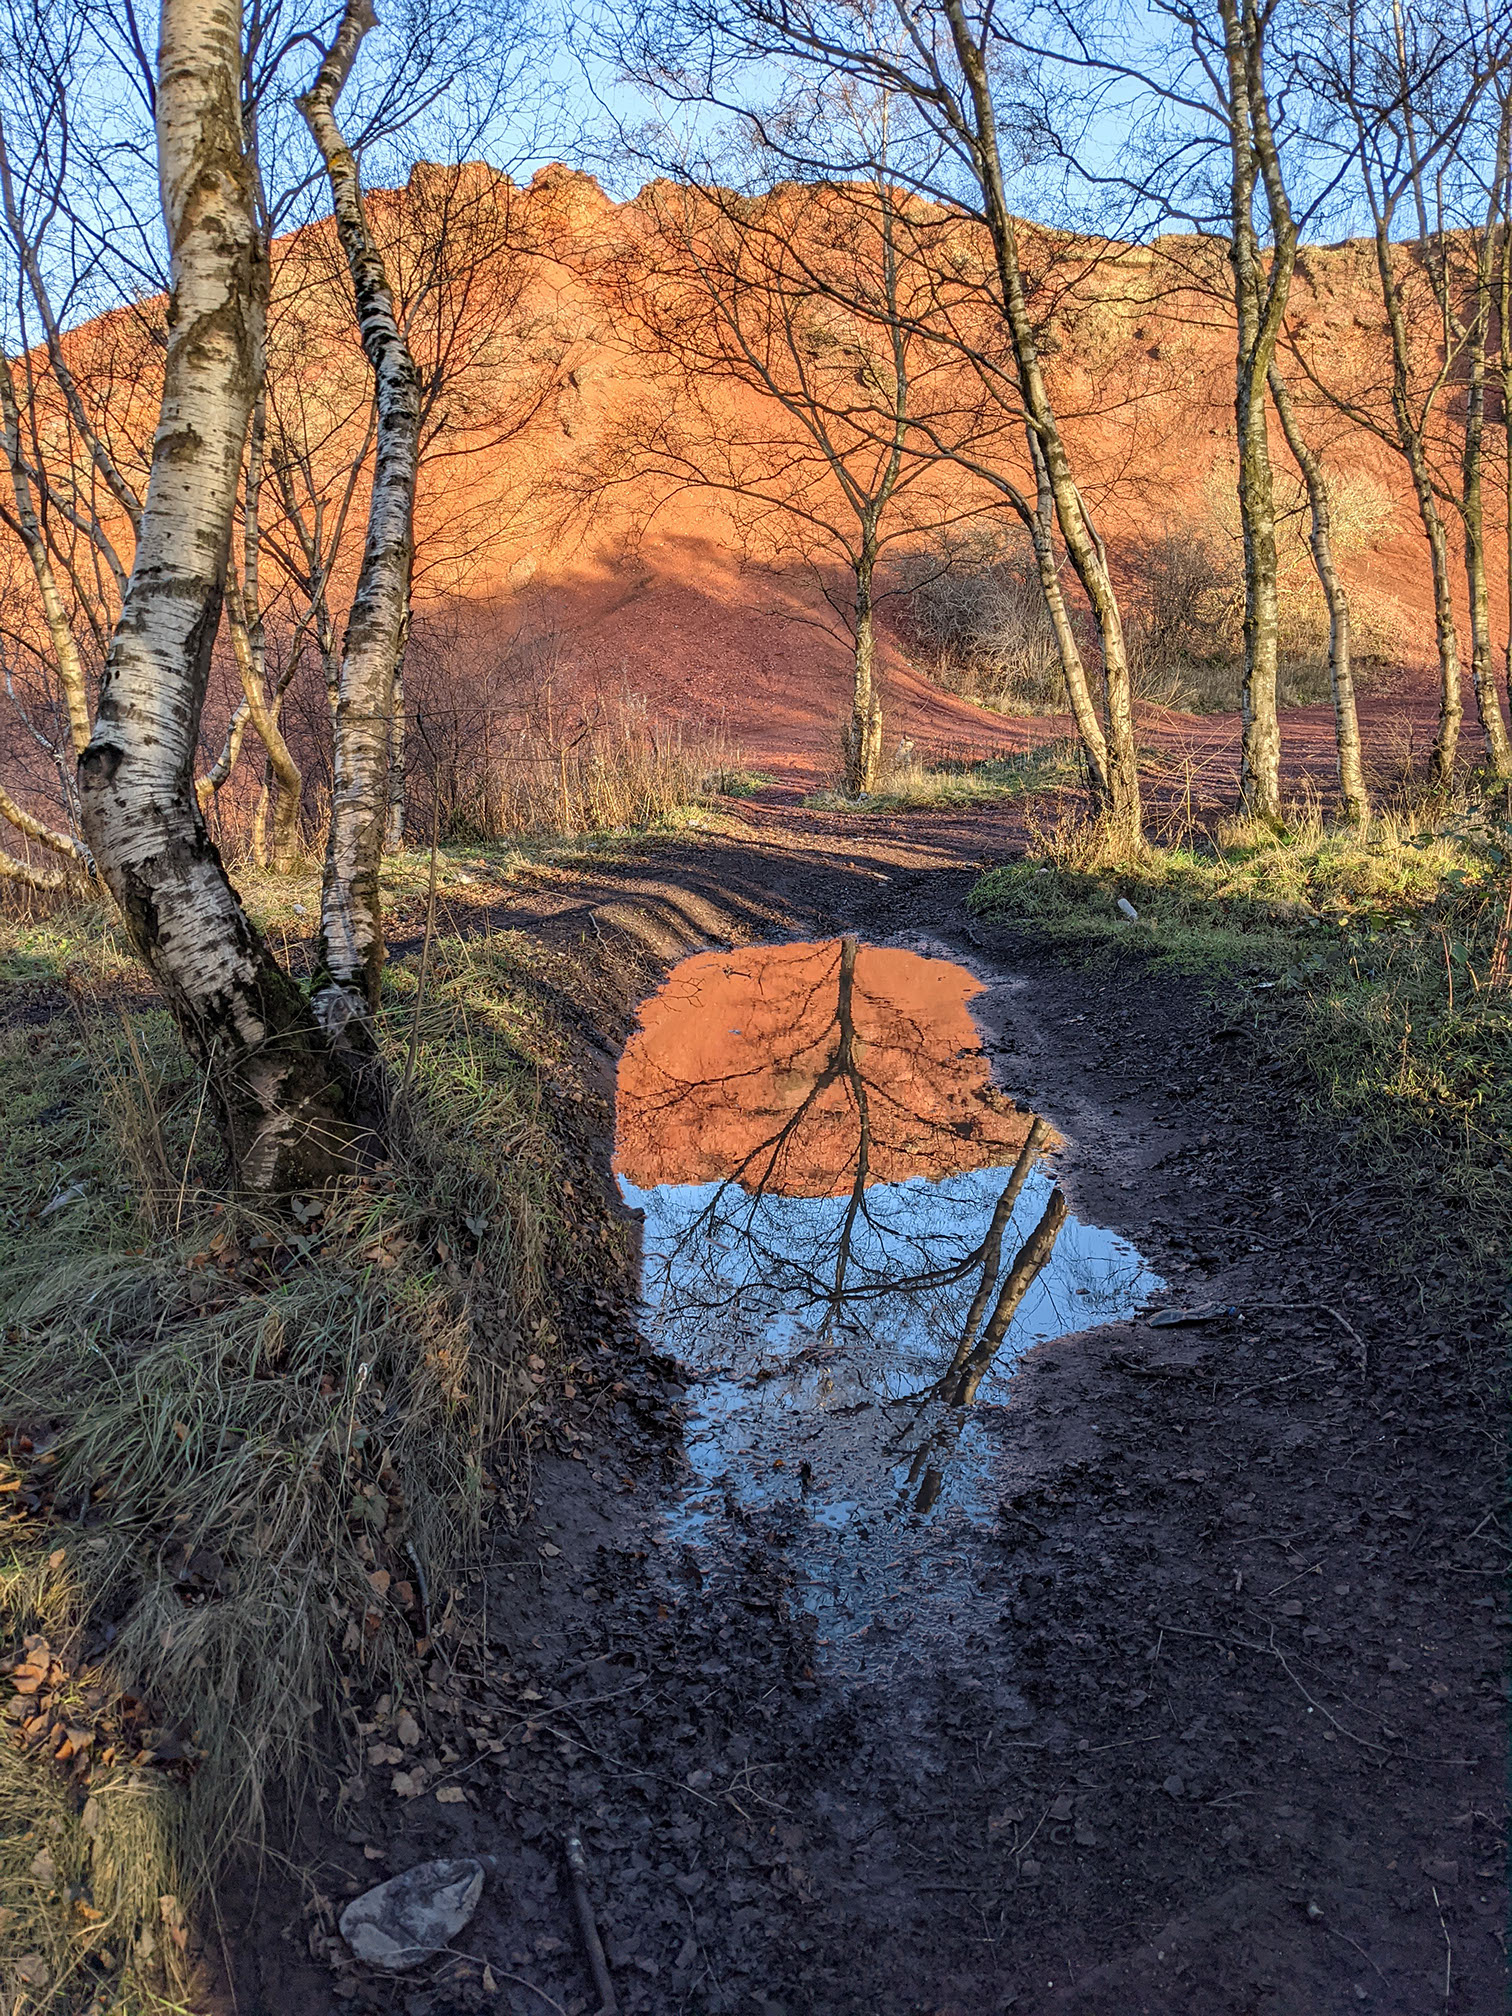 Albyn Bing, Broxburn, West Lothian is seen reflected in a long puddle in this portrait image, surrounded by bare silver birch trees. The lower slopes of the bing can be seen in the backgorund, but the puddle shows an inverted reflection of the peak of the bing in vivid orange-red and a bright blue sky.